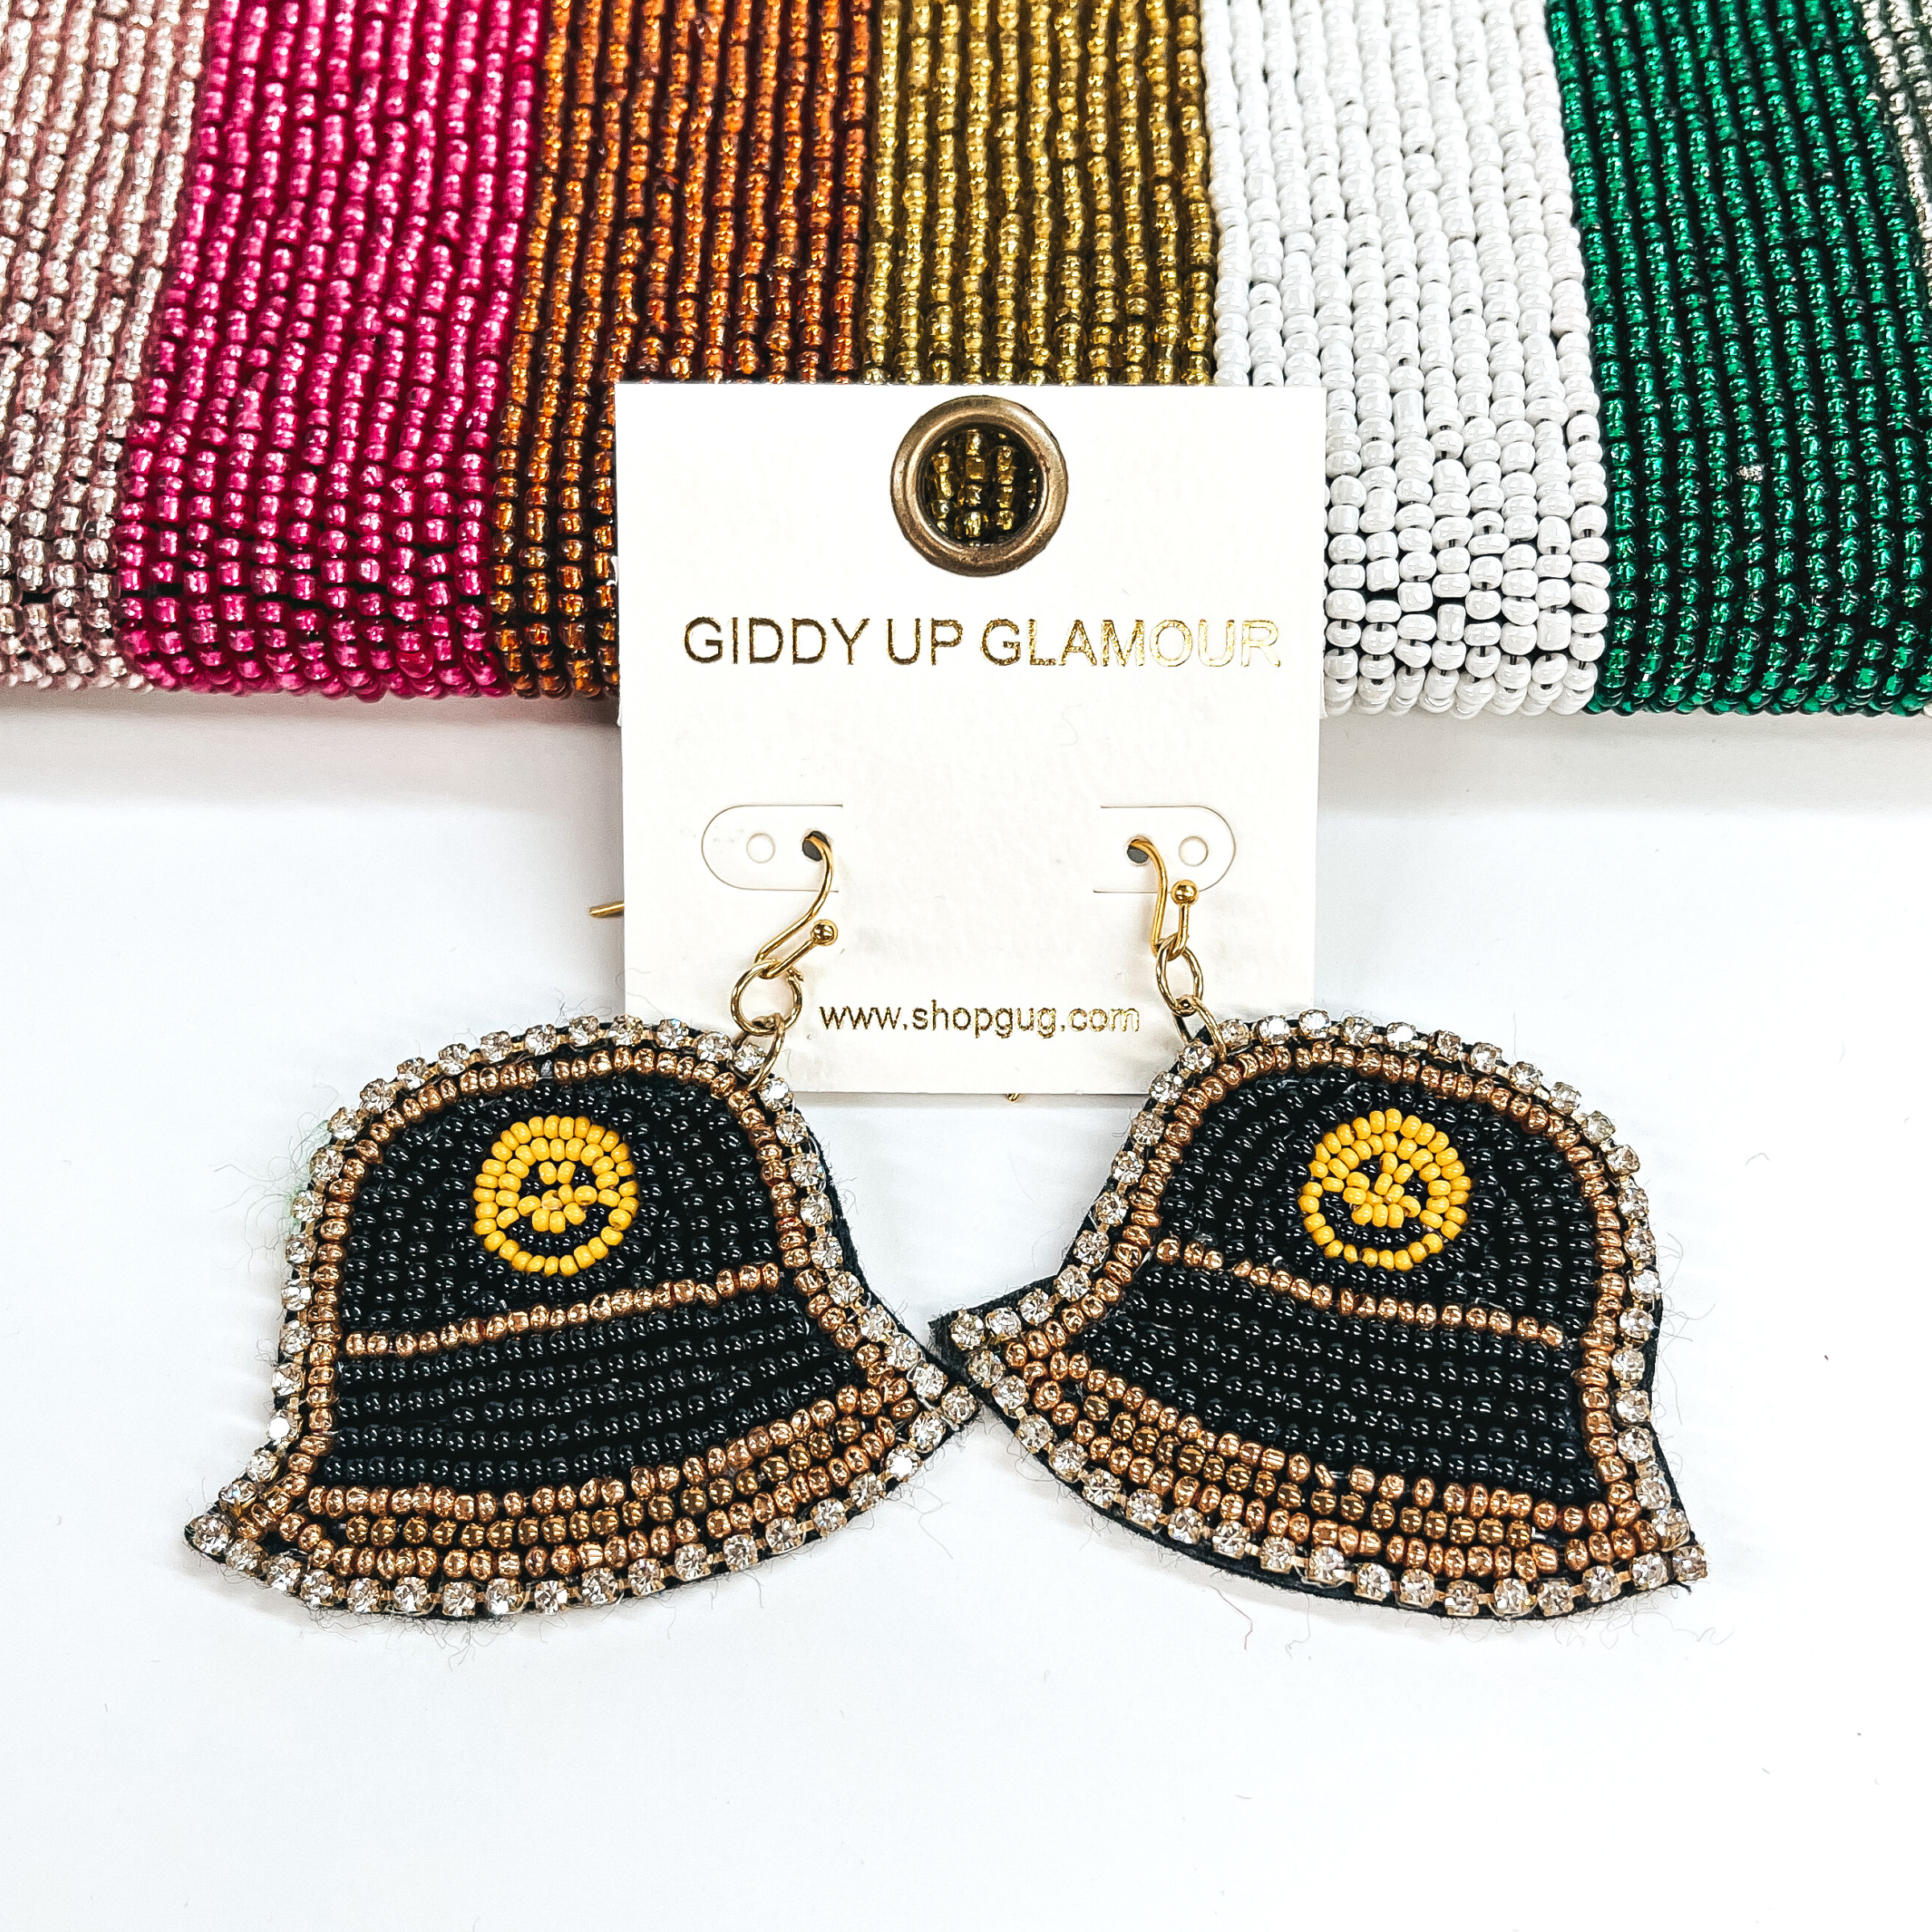 Time To Travel Bucket Hat Beaded Earrings with Happy Face and Clear Rhinestones in Black and Gold Tone - Giddy Up Glamour Boutique